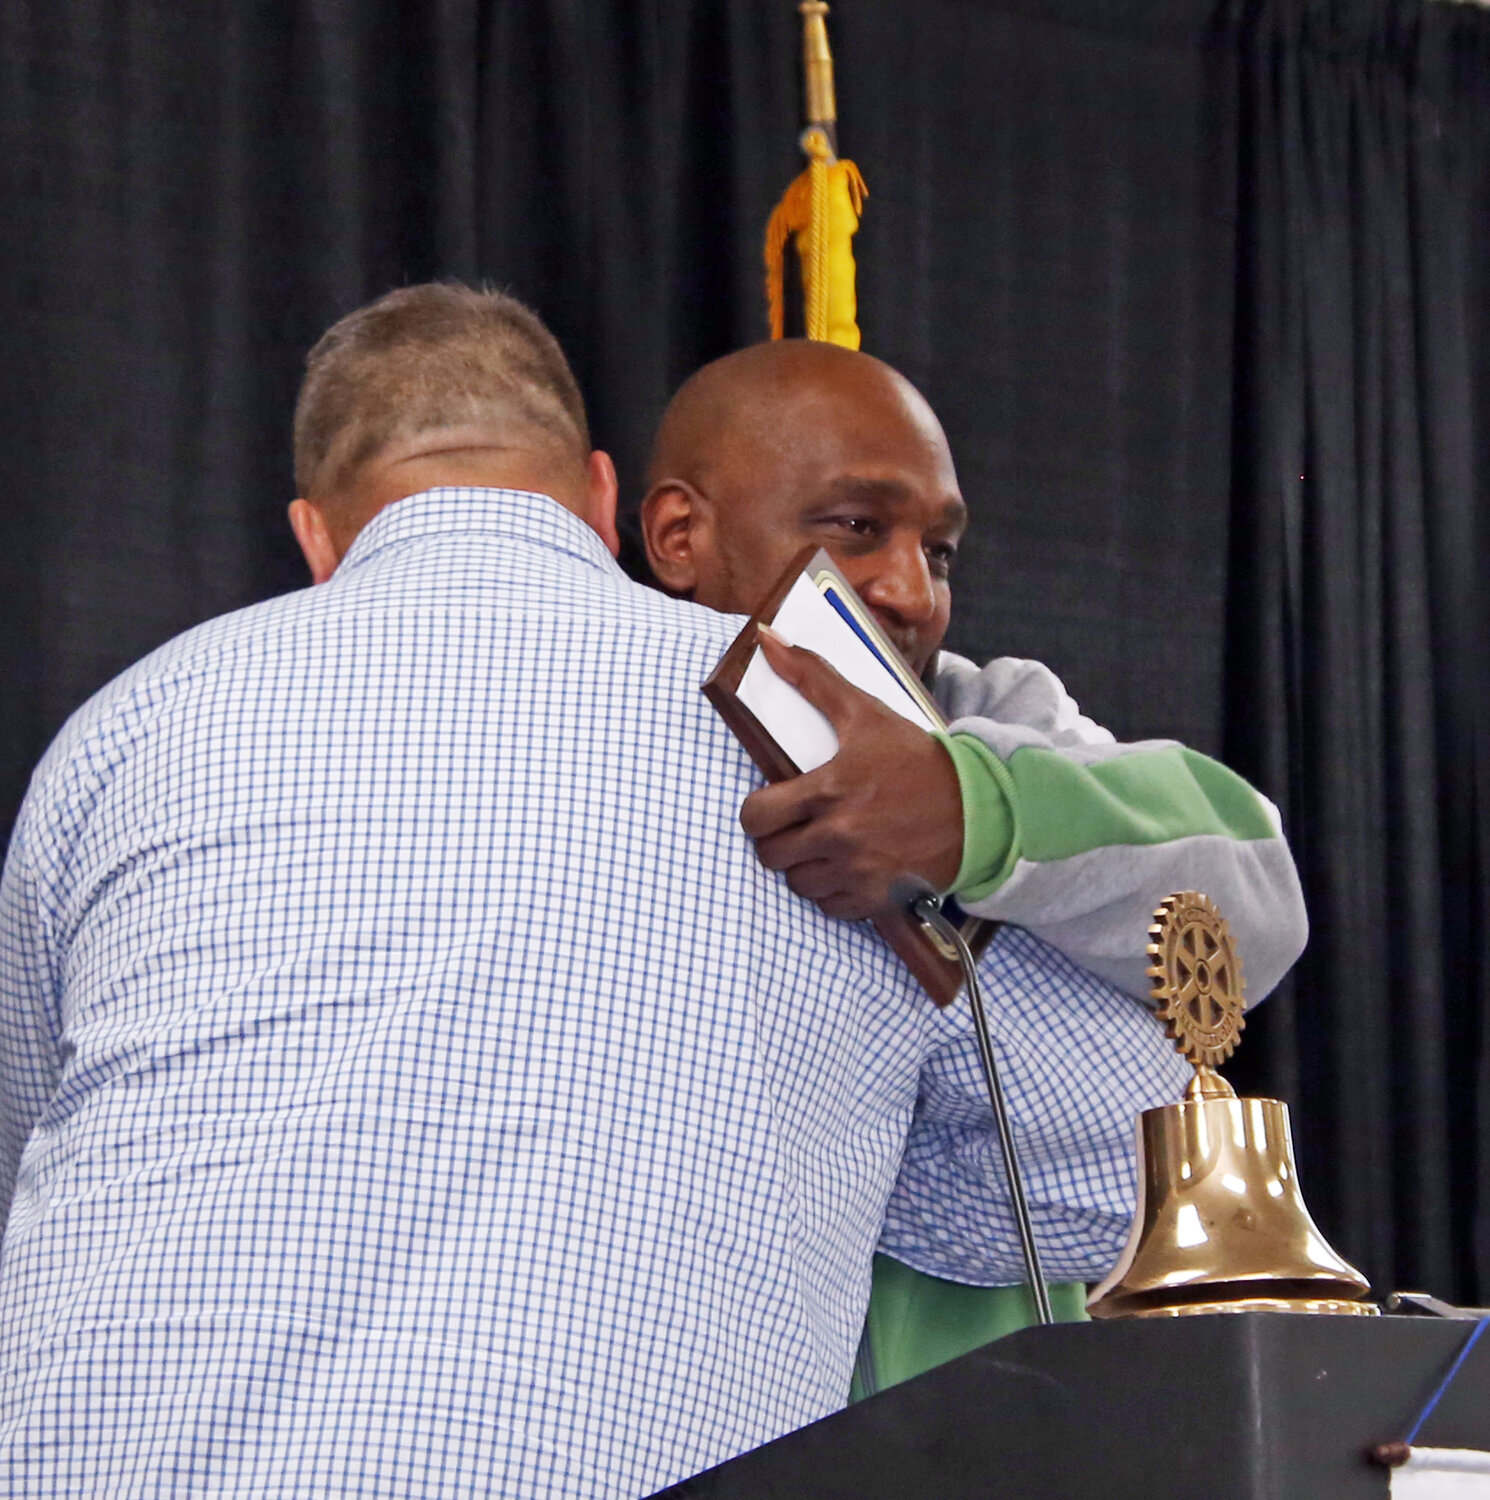 George McGinnity, of Beyond Your Walls, left, embraces Alfred Johns after Johns received a "Hero" award from the Rotary Club of Wicomico County.